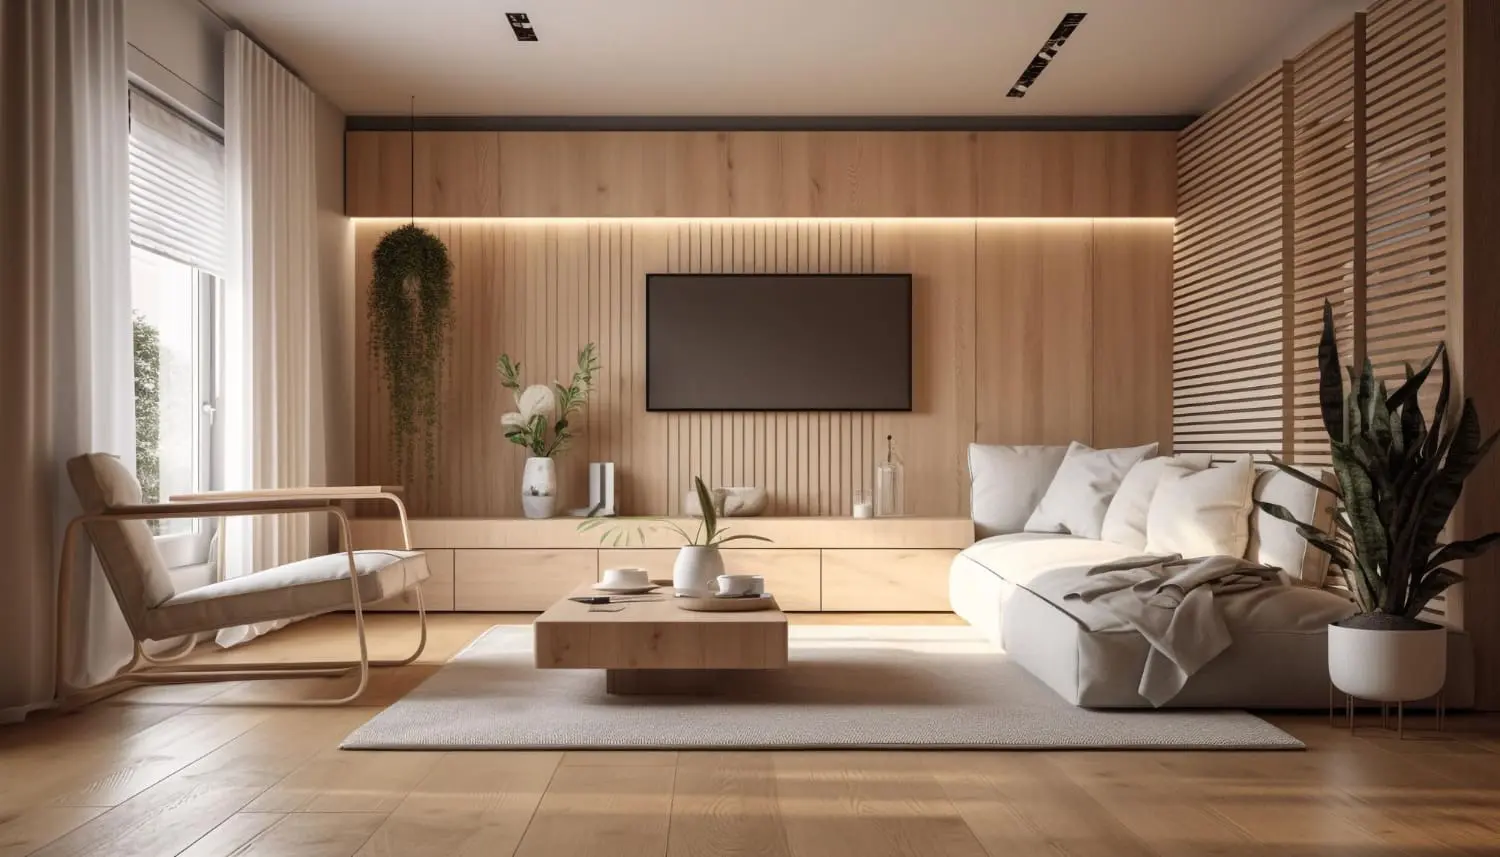 Enhancing Interiors: The Timeless Appeal of Wood Paneling